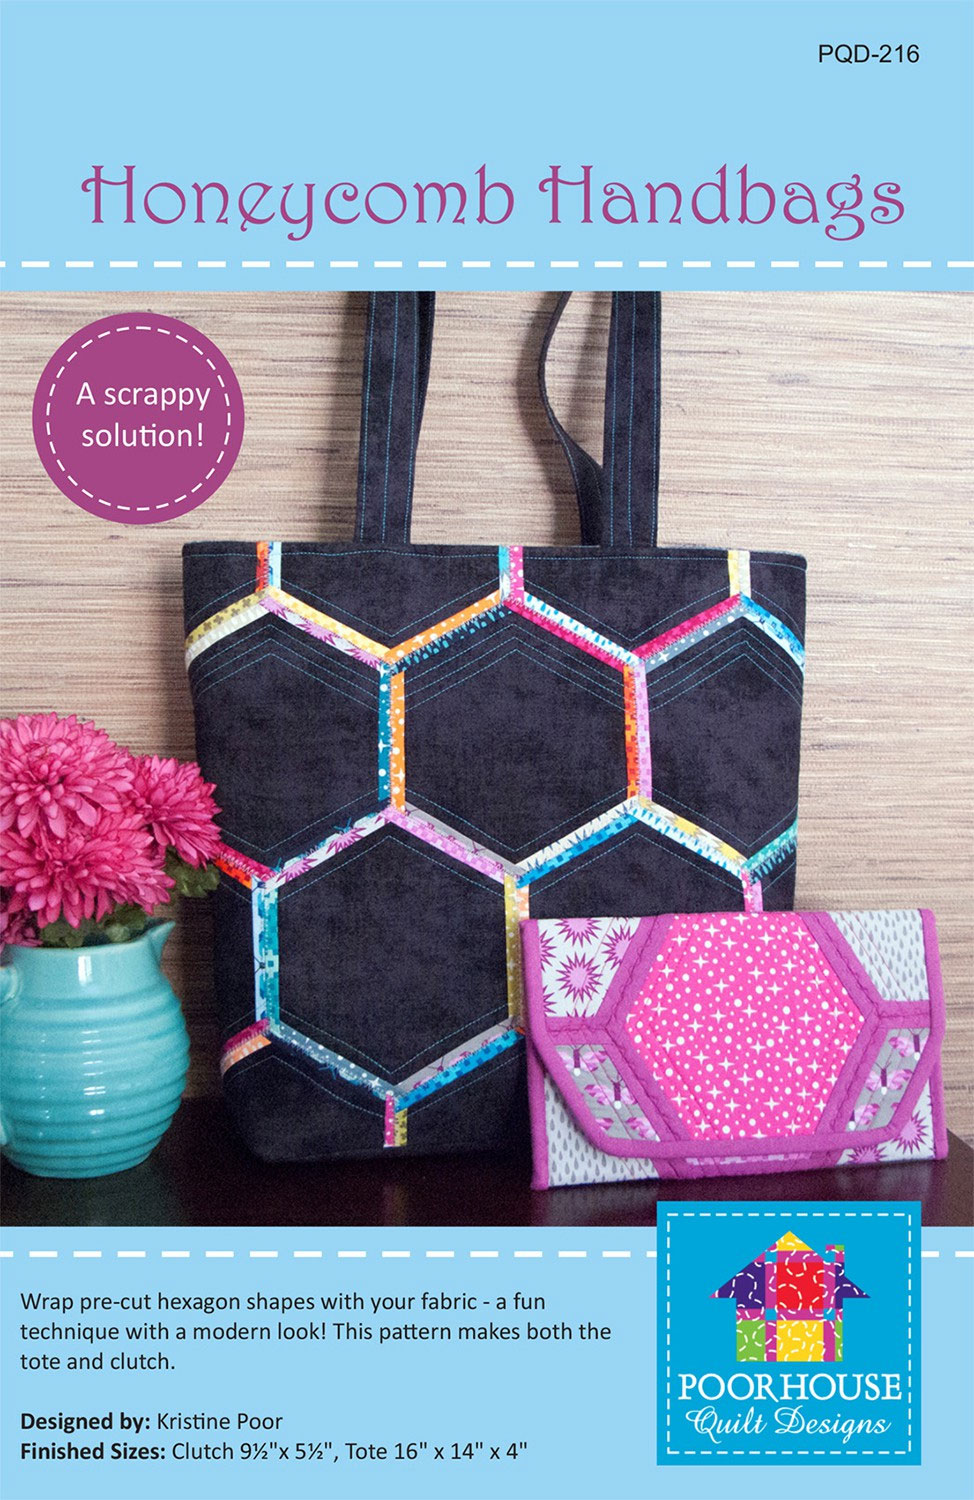 Honeycomb-Handgbags-sewing-pattern-Poorhouse-Designs-front